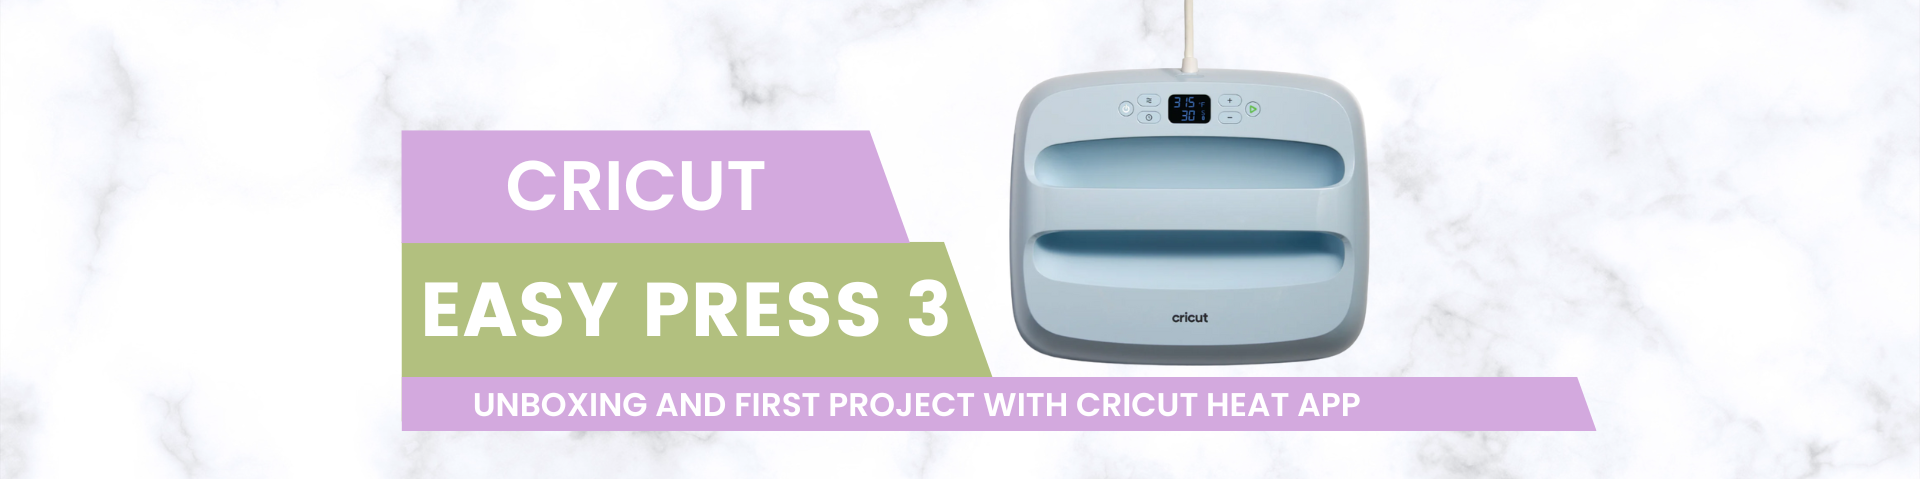 Getting Started with Cricut EasyPress 3 and Cricut Heat App